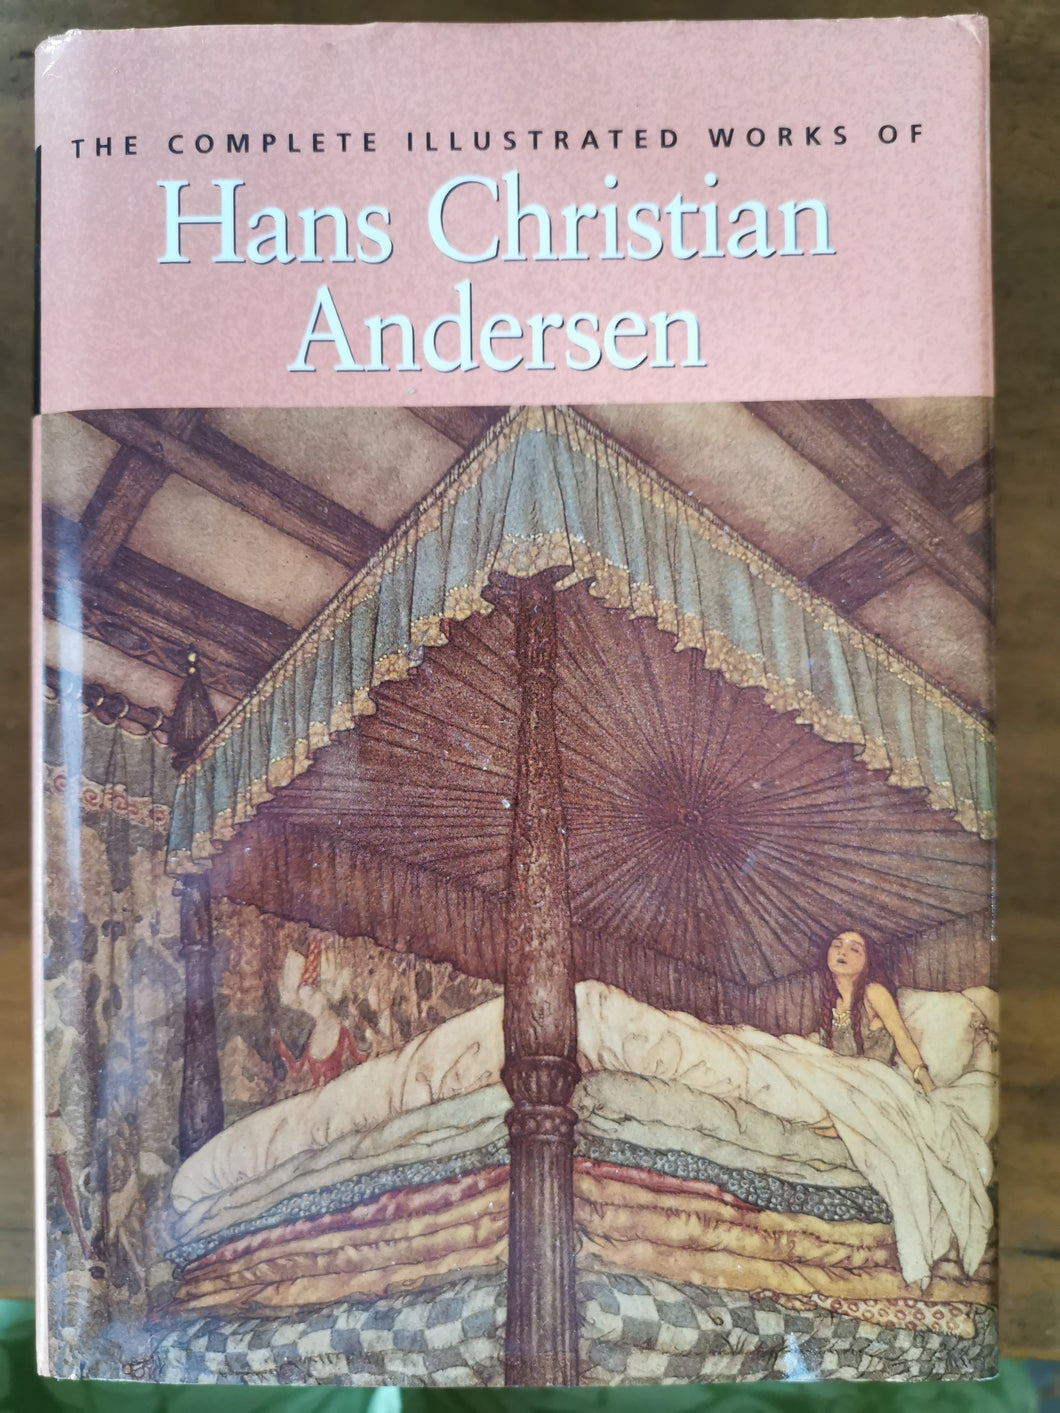 The Complete Illustrated Works of Hans Christian Andersen